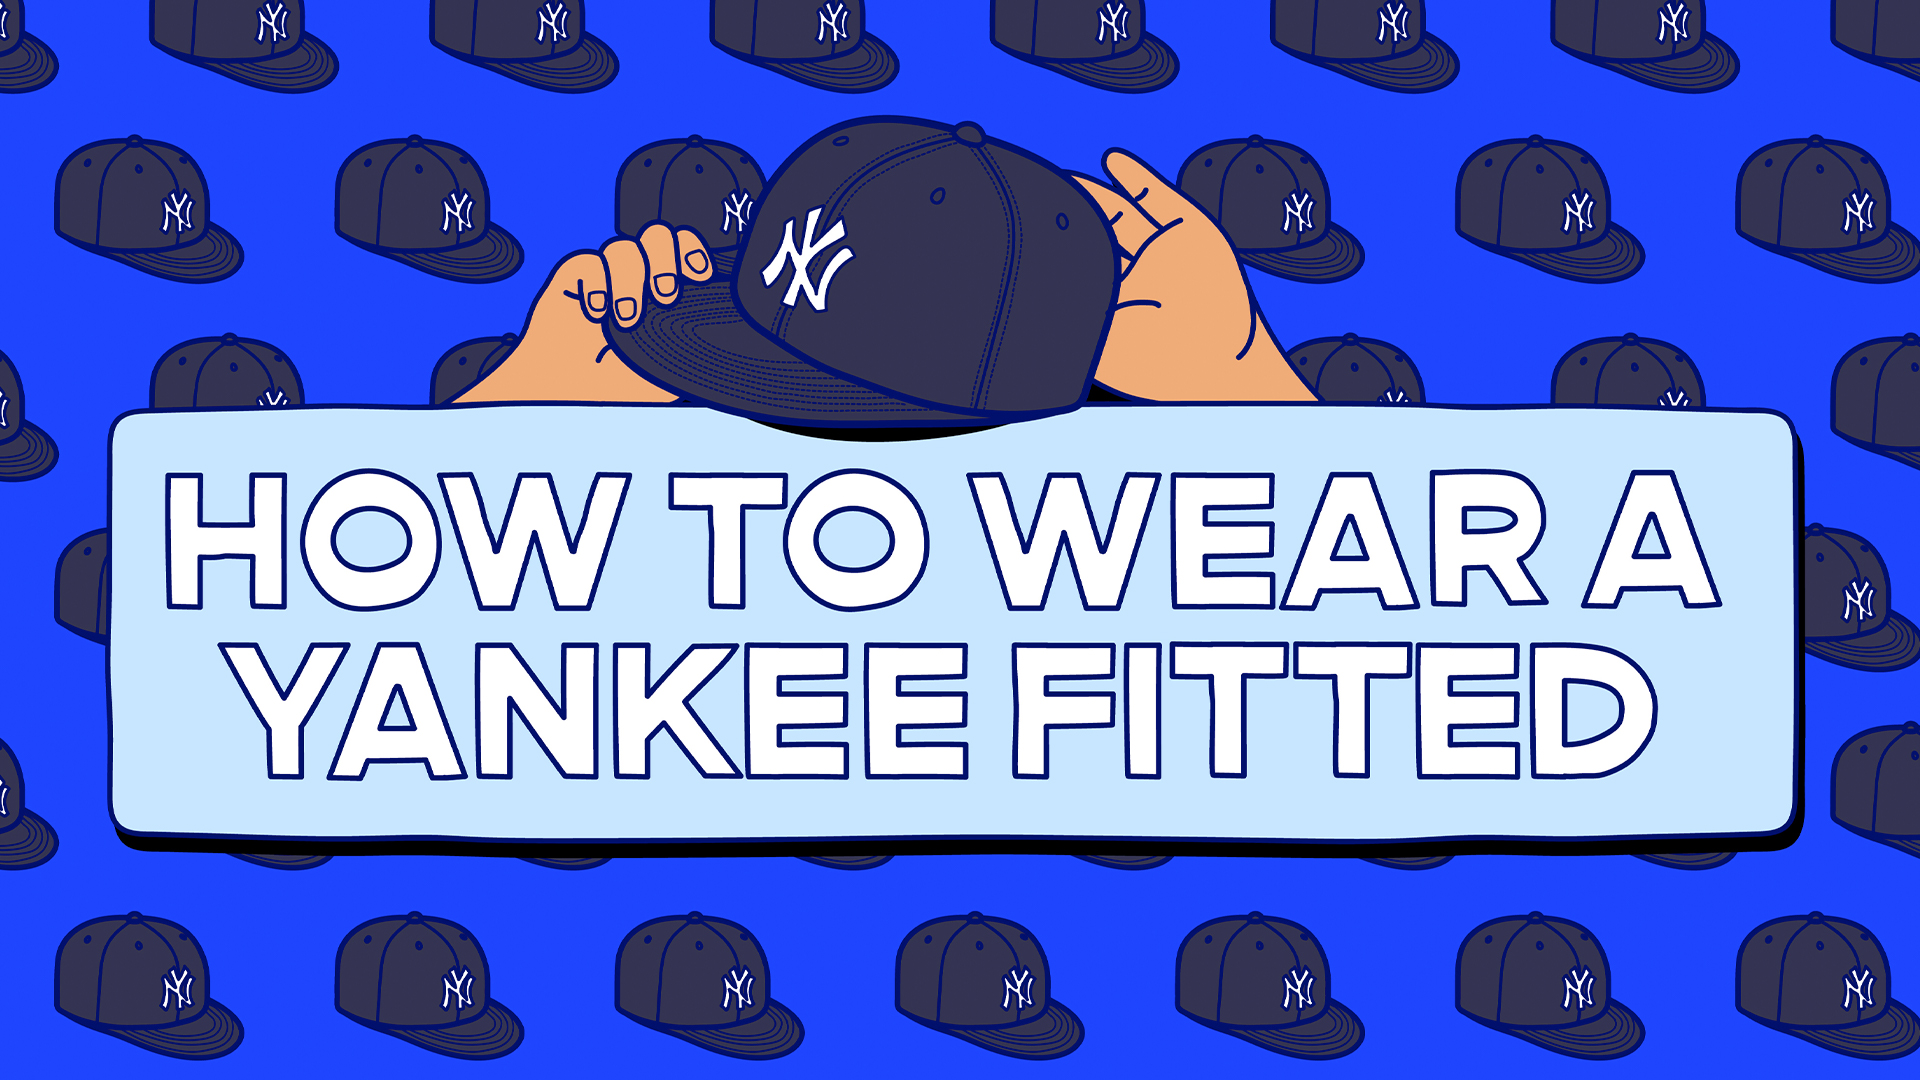 Spike Lee's hat trick: the story of his iconic Yankees baseball